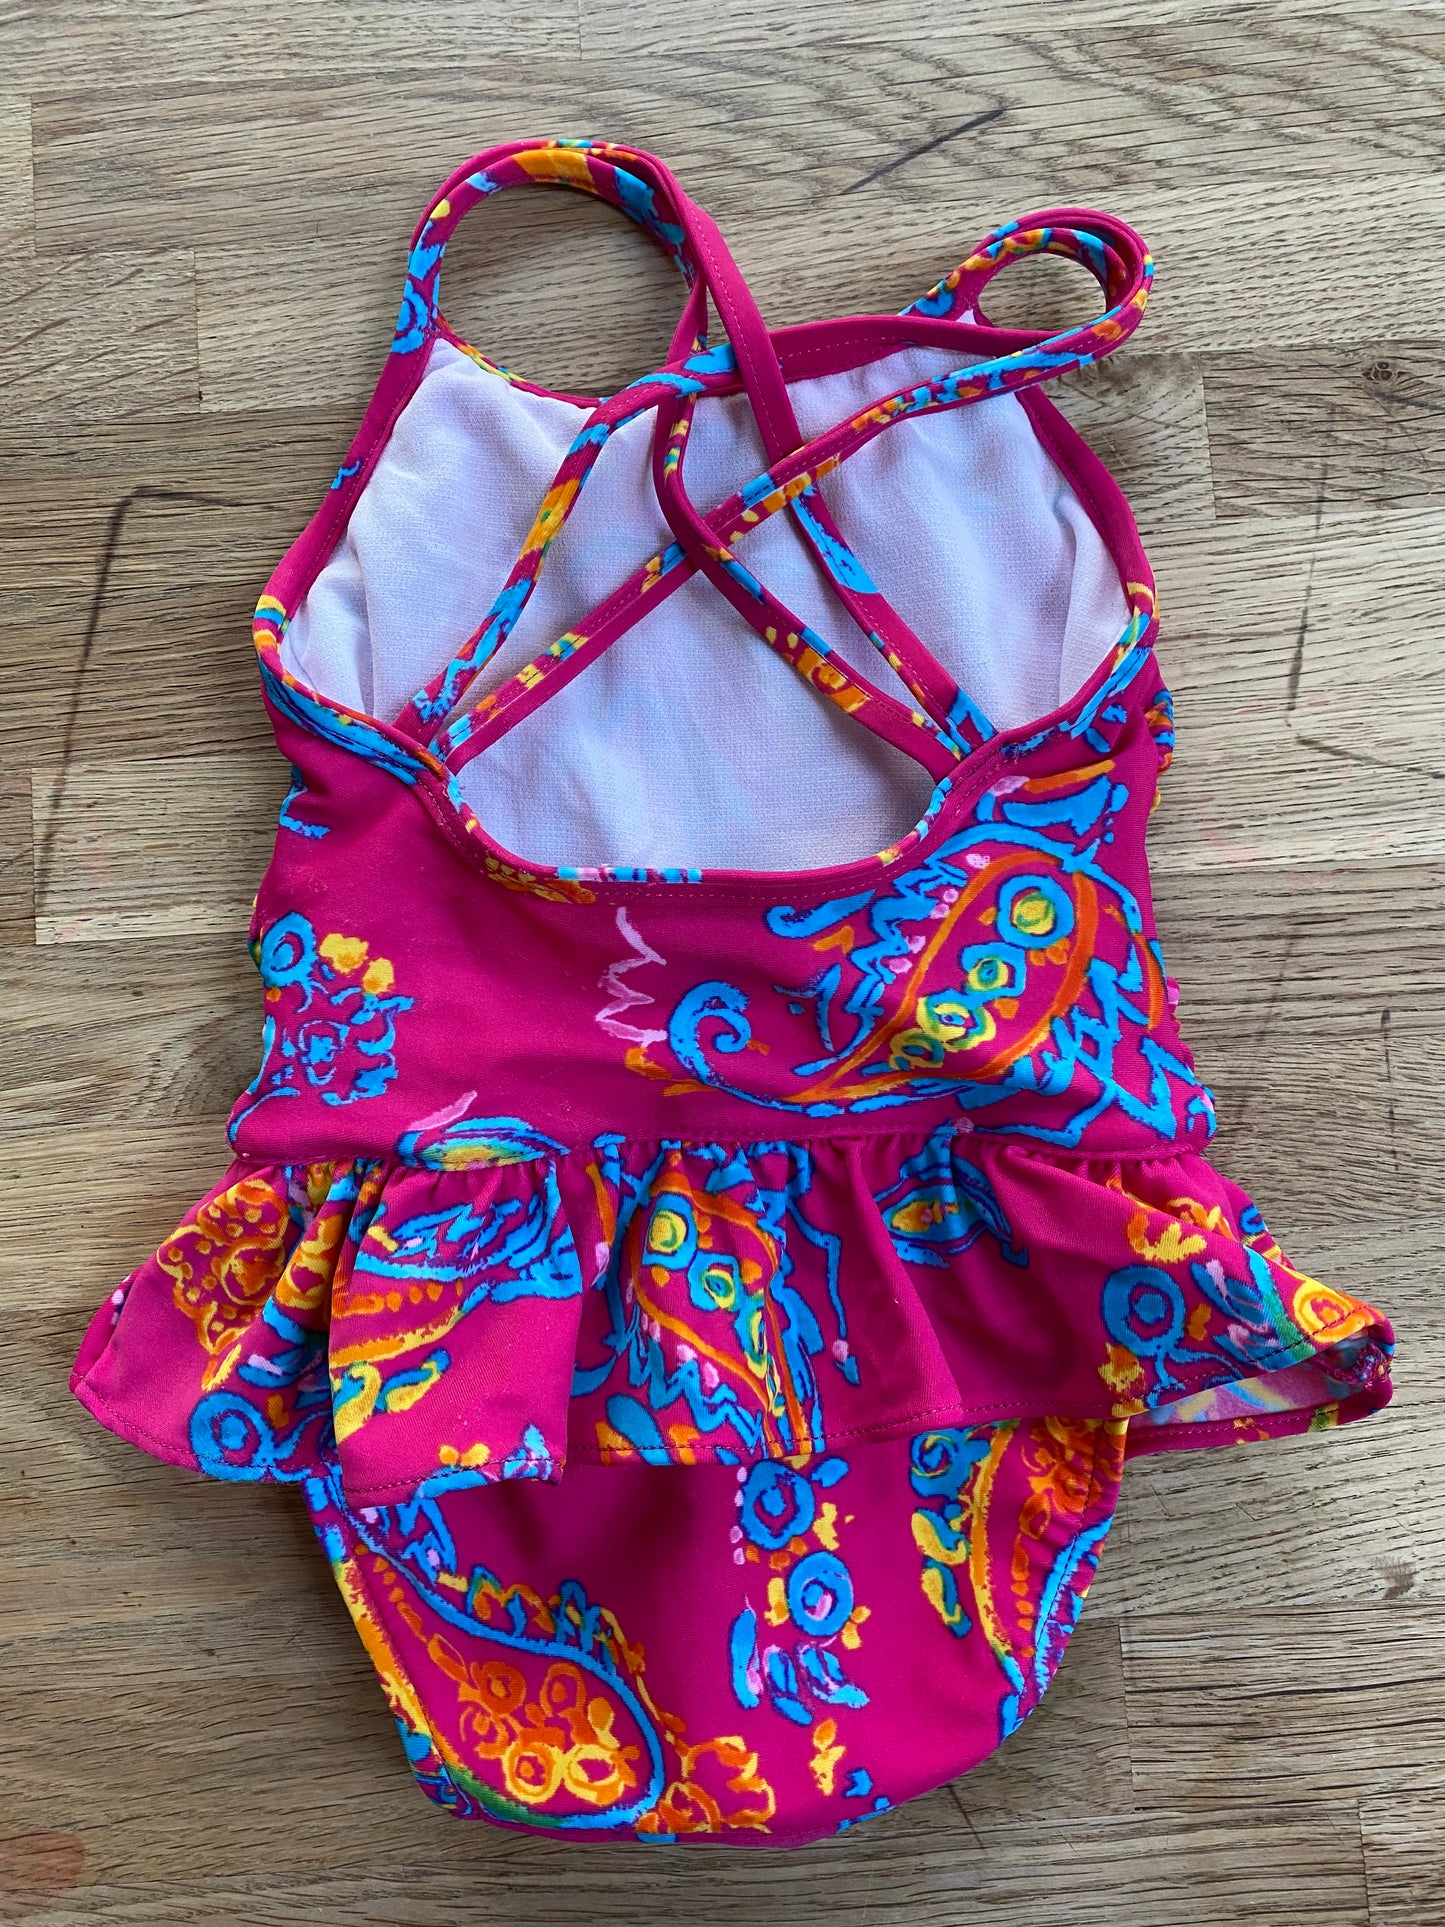 Pink Floral Bathing Suit by Ralph Lauren - 12mo (Pre-Loved)